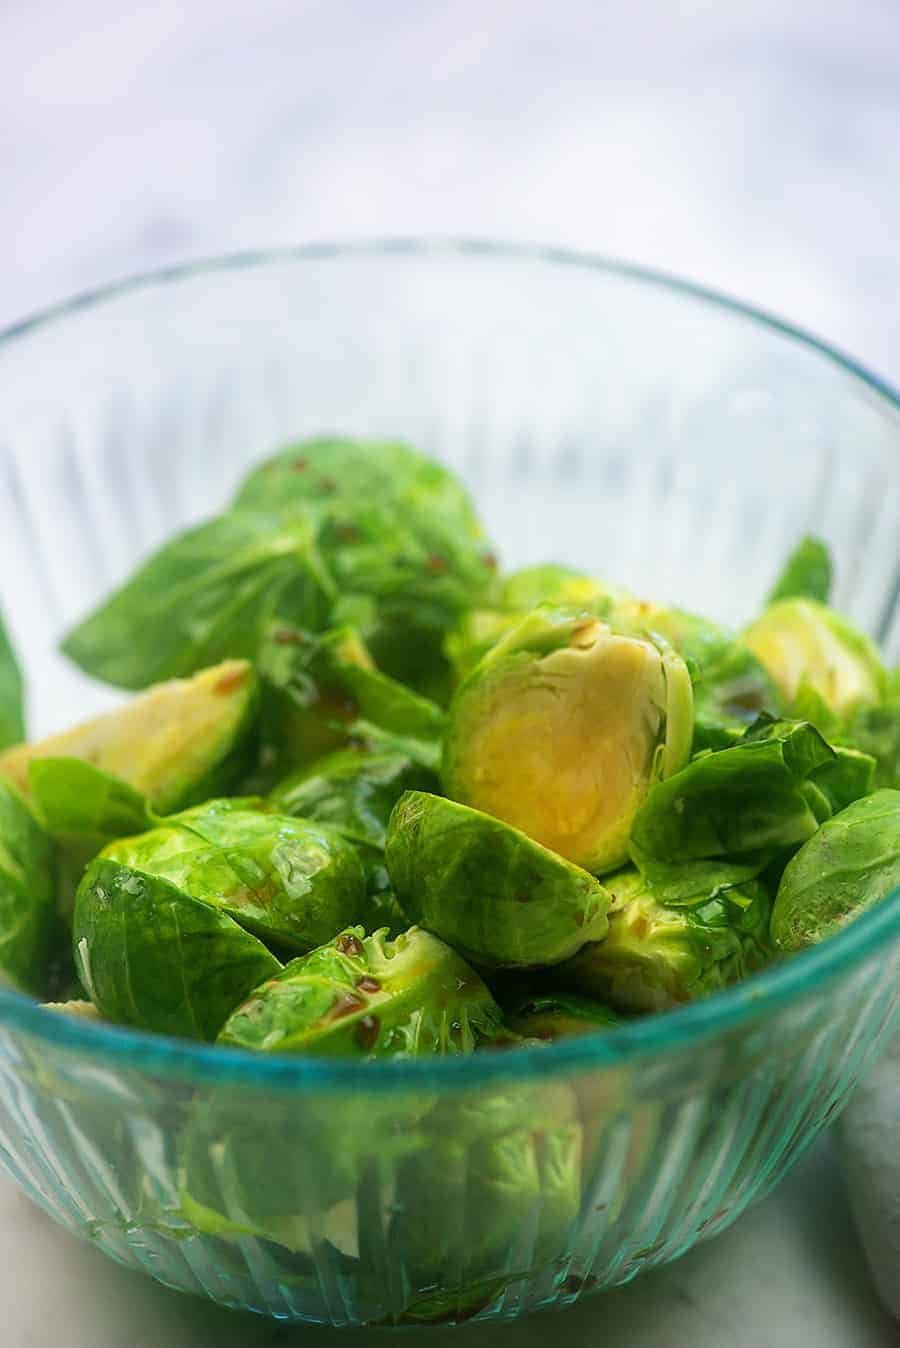 seasoned brussels sprouts in a glass bowl